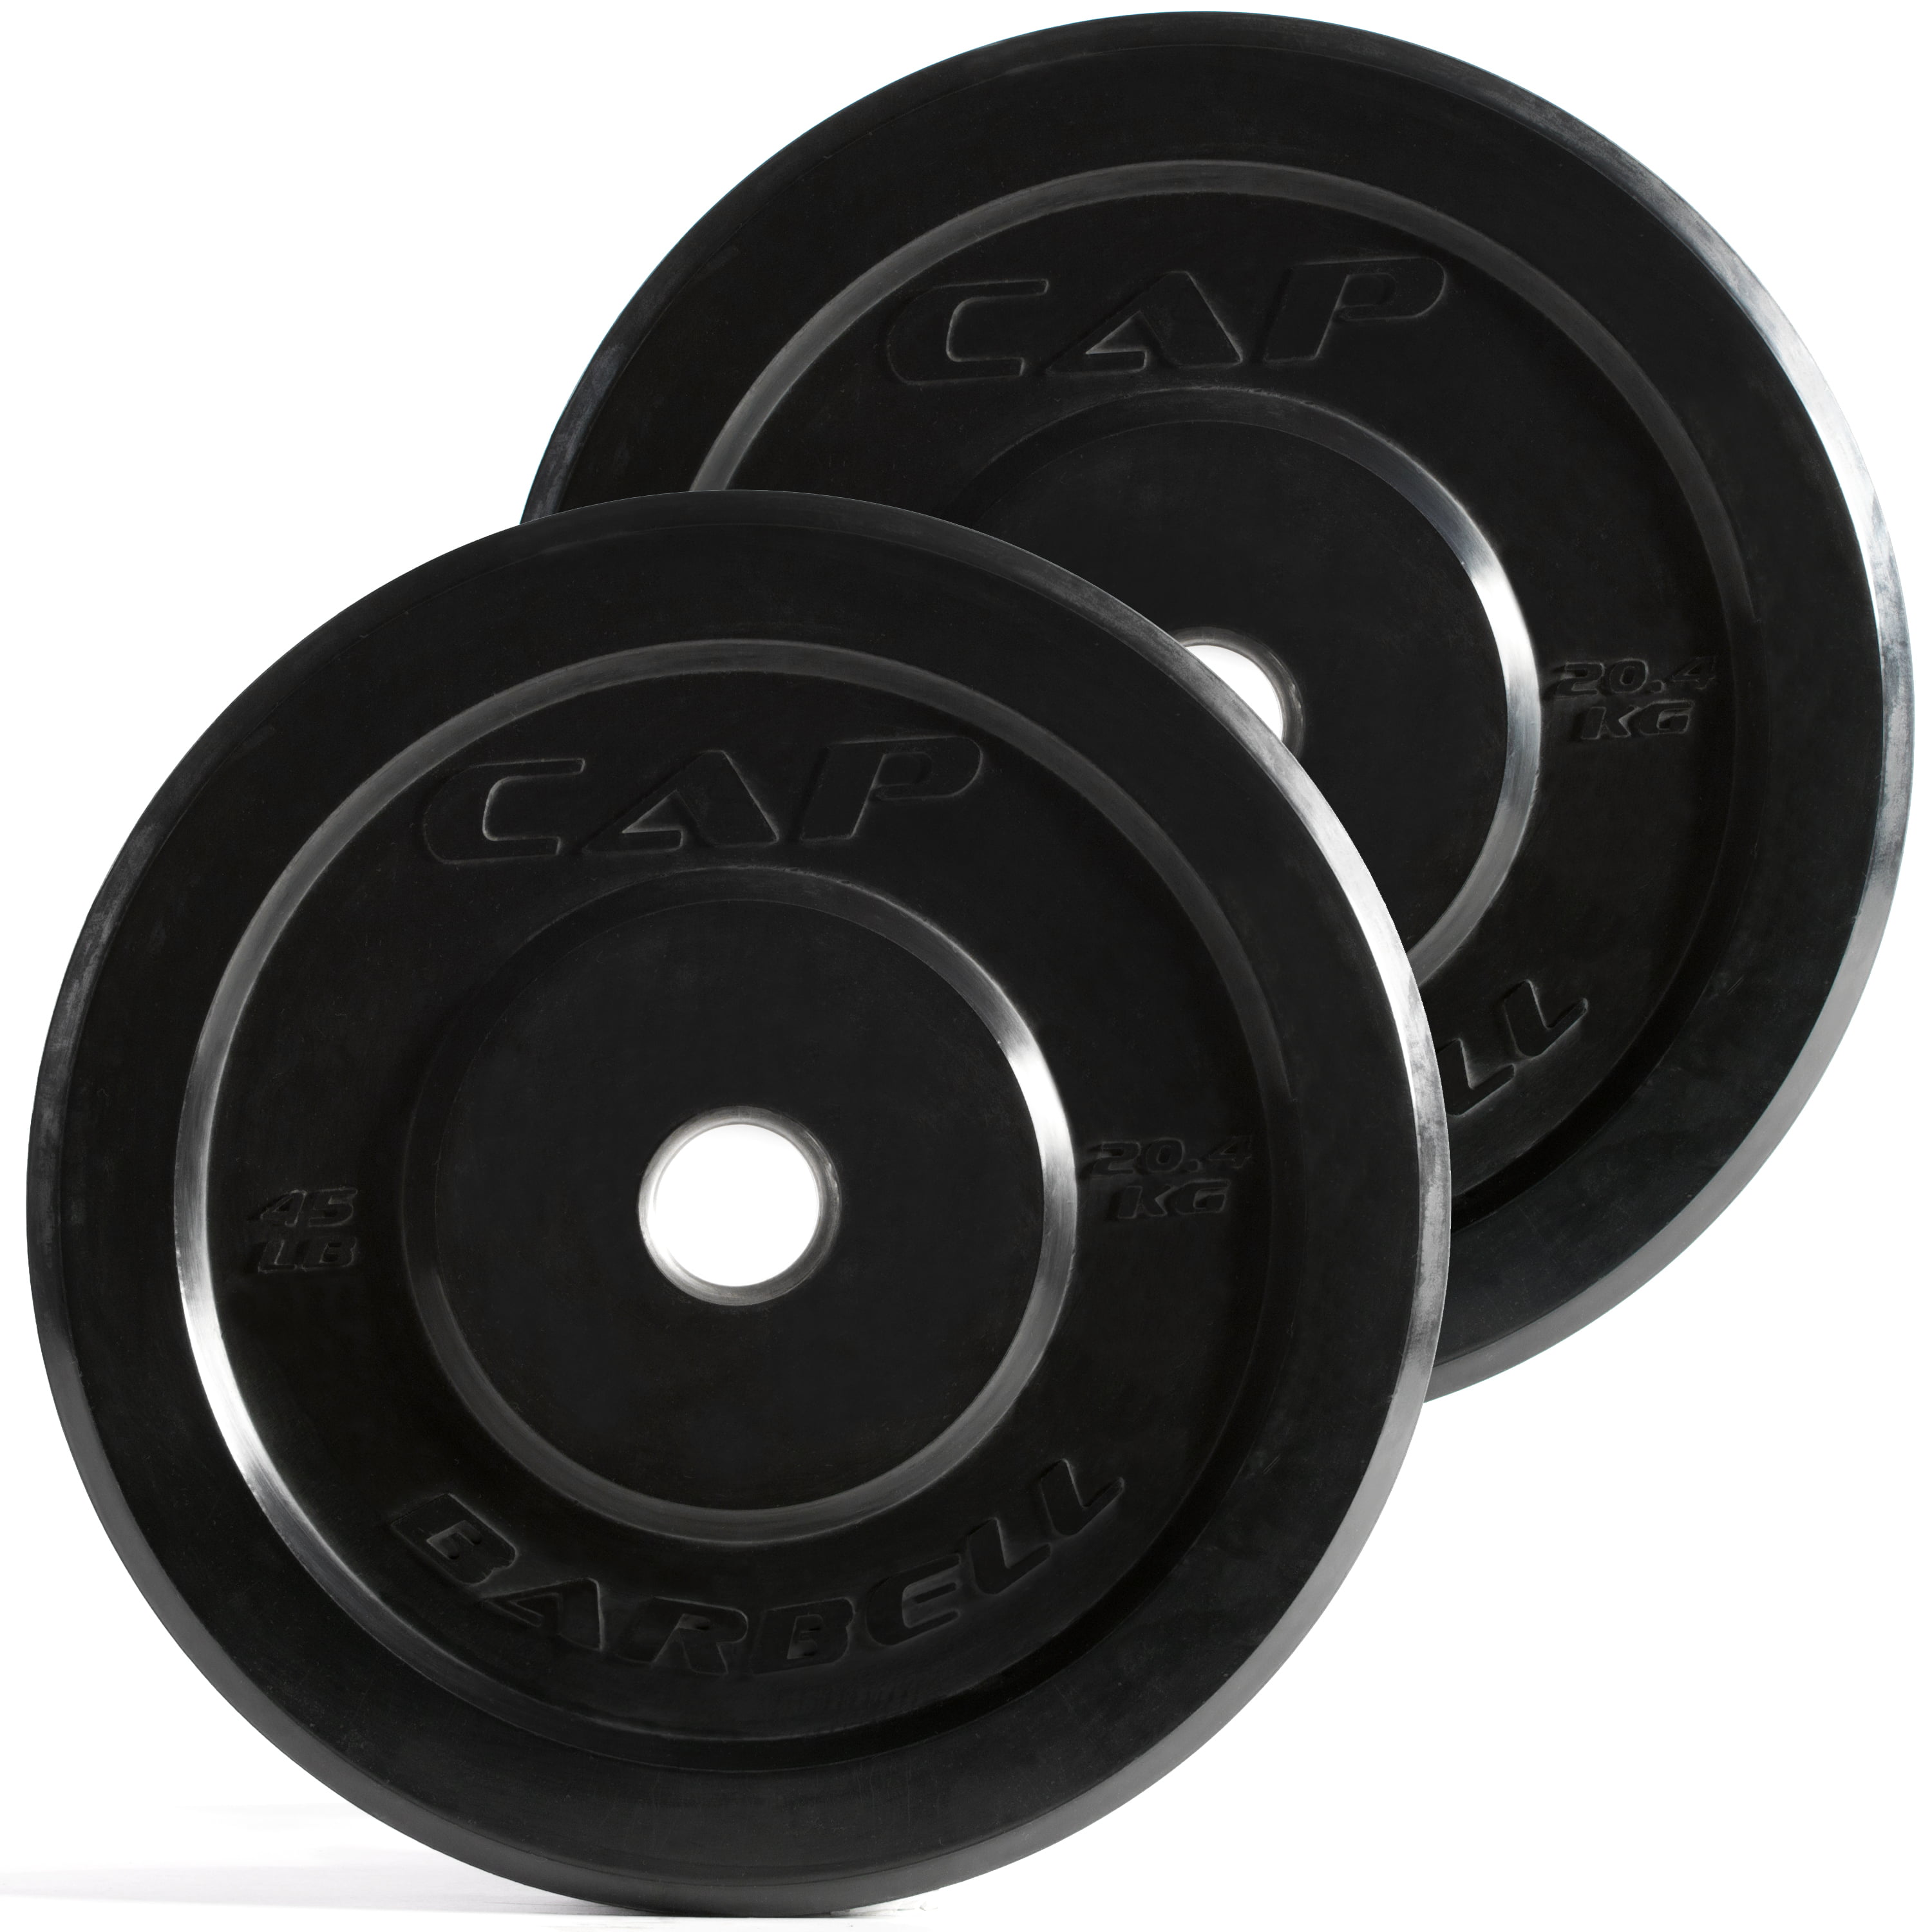 Pair 90 lb TOTAL Weider 45lb Pound Olympic Weight Plate Plates Set 